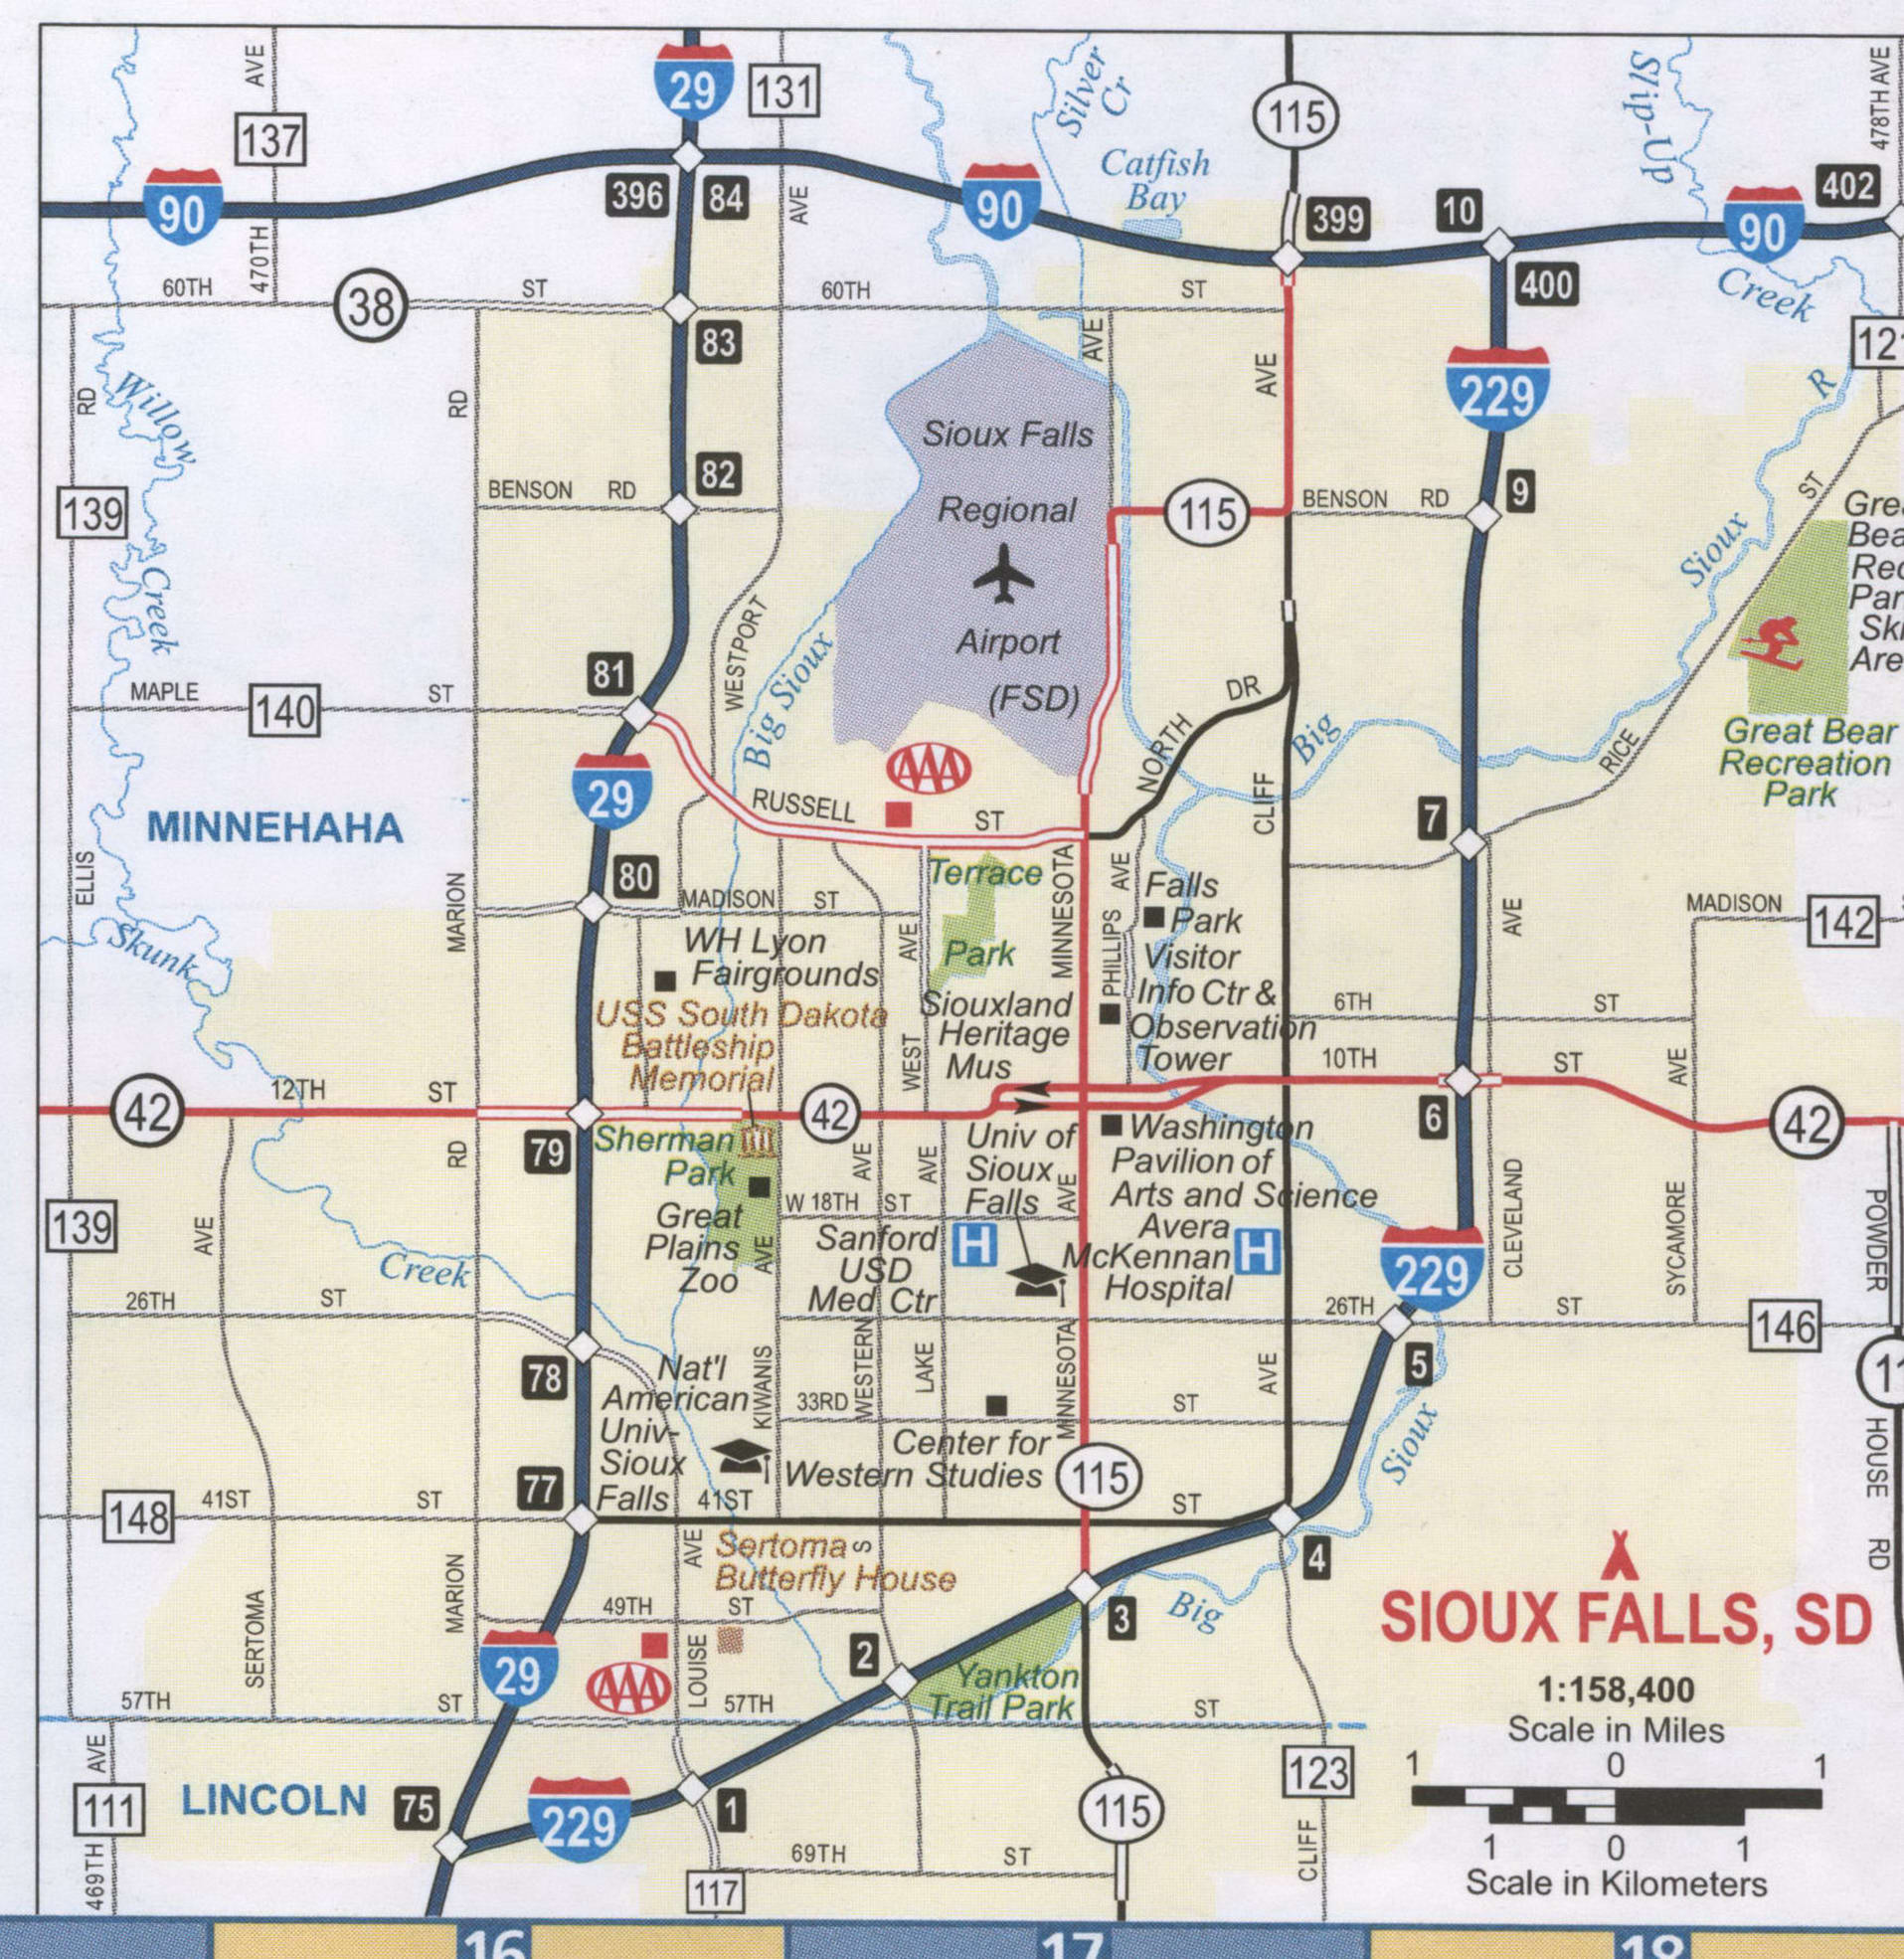 Sioux Falls SD roads map, map highway Sioux Falls city surrounding area